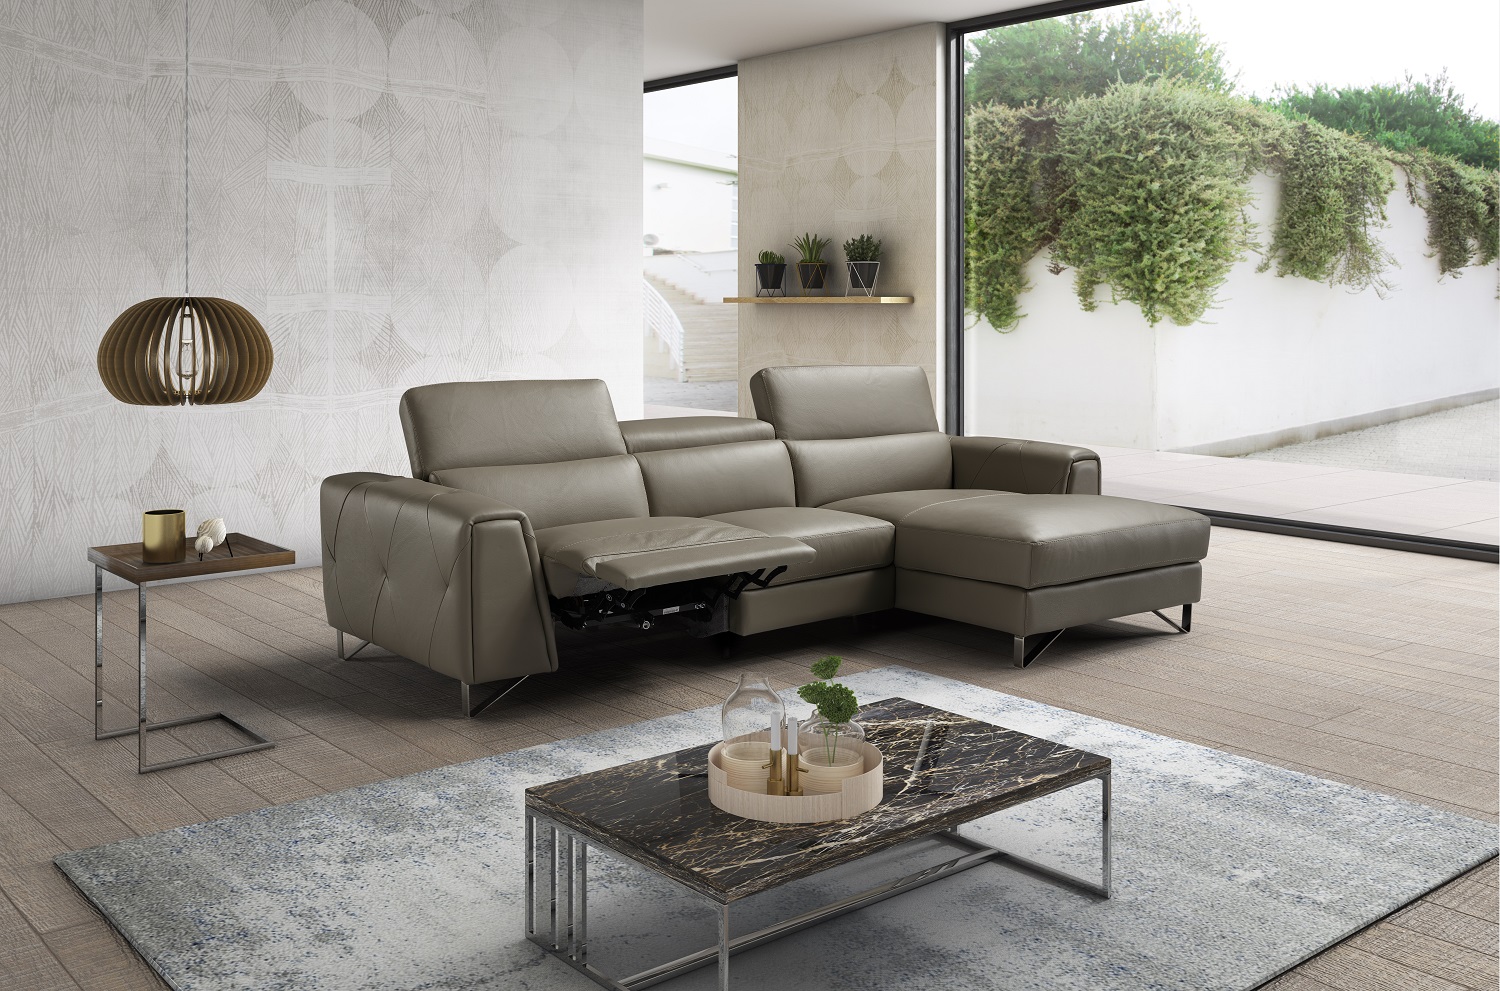 Italian Made Taupe Full Leather Sectional Sofa with Adjustable Headrest - Click Image to Close